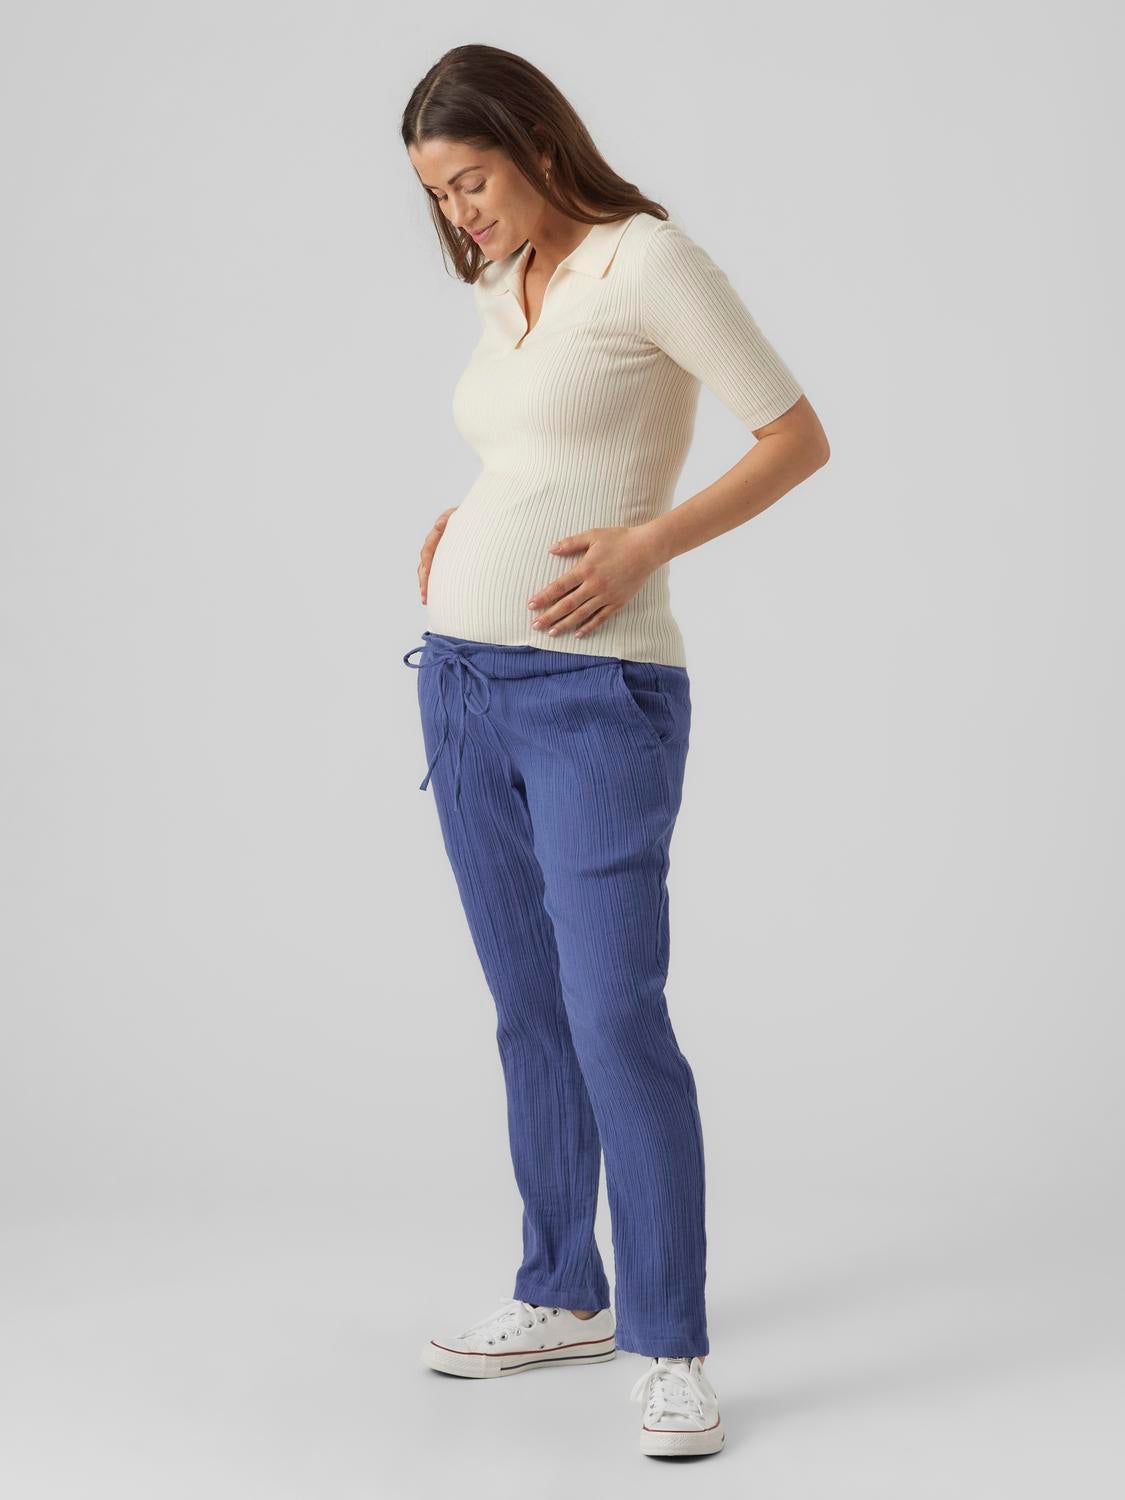 Mammas Maternity Lycra Spandex Soft & Stretchable Solid Maternity Trouser  White Online in India, Buy at Best Price from Firstcry.com - 14936951